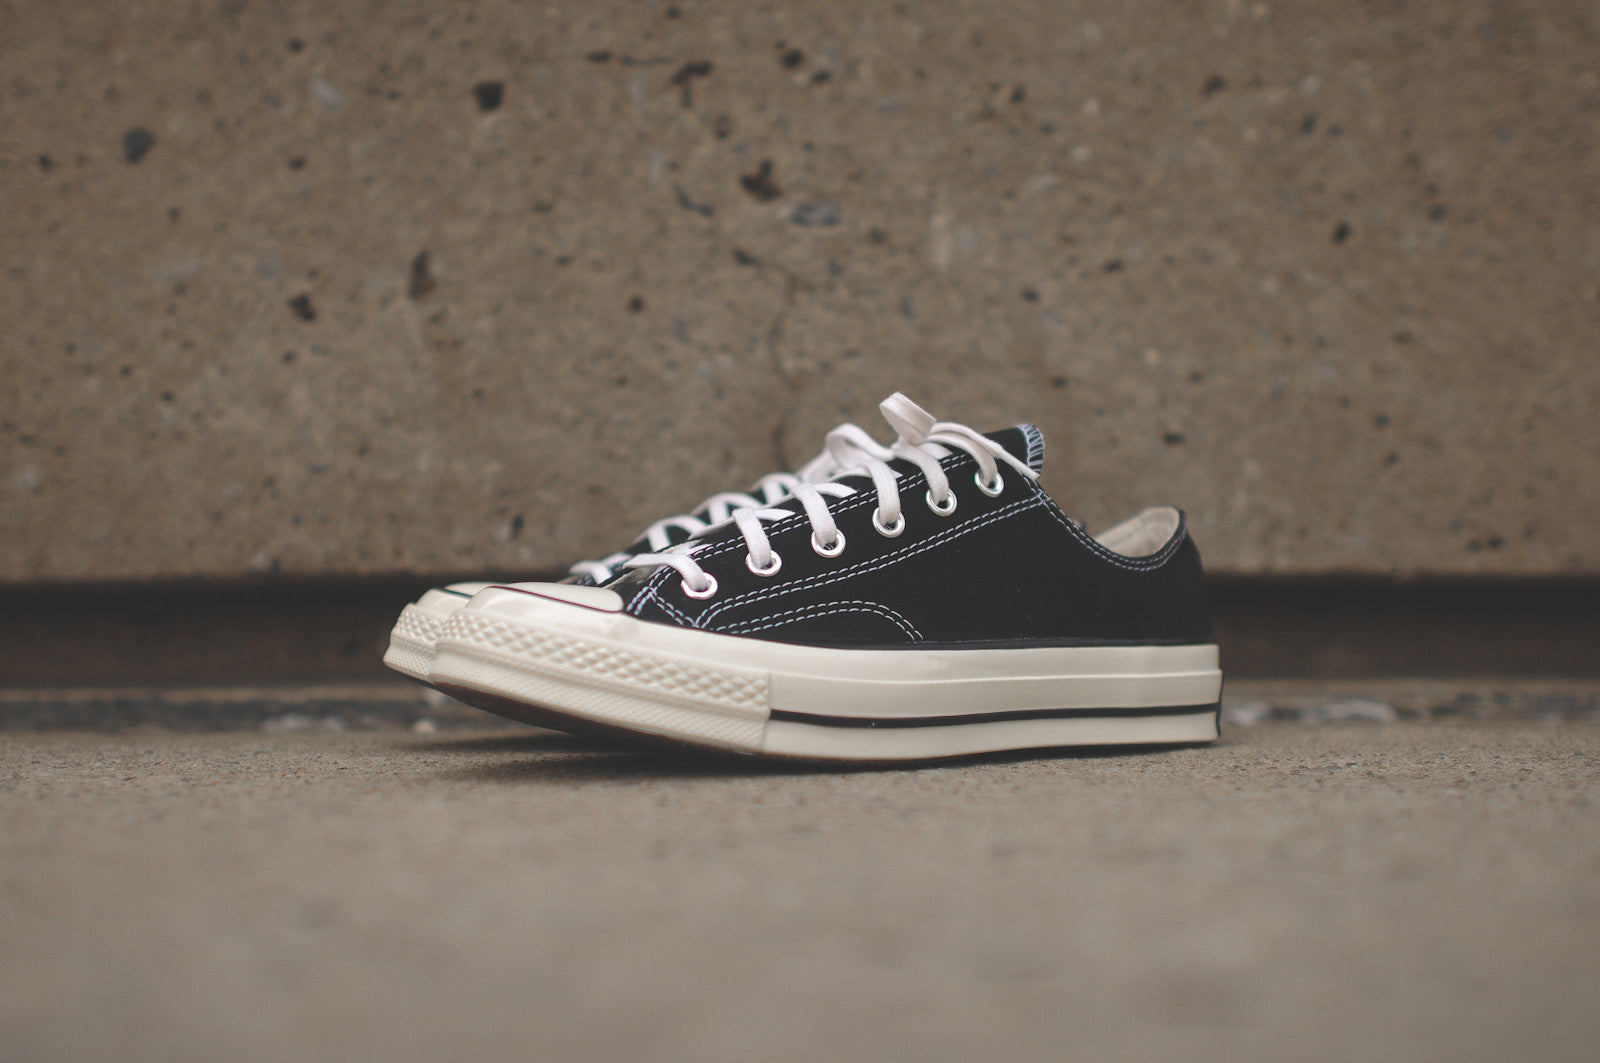 Converse Chuck Taylor All Star Low 1970 - Black / White | Kith NYC